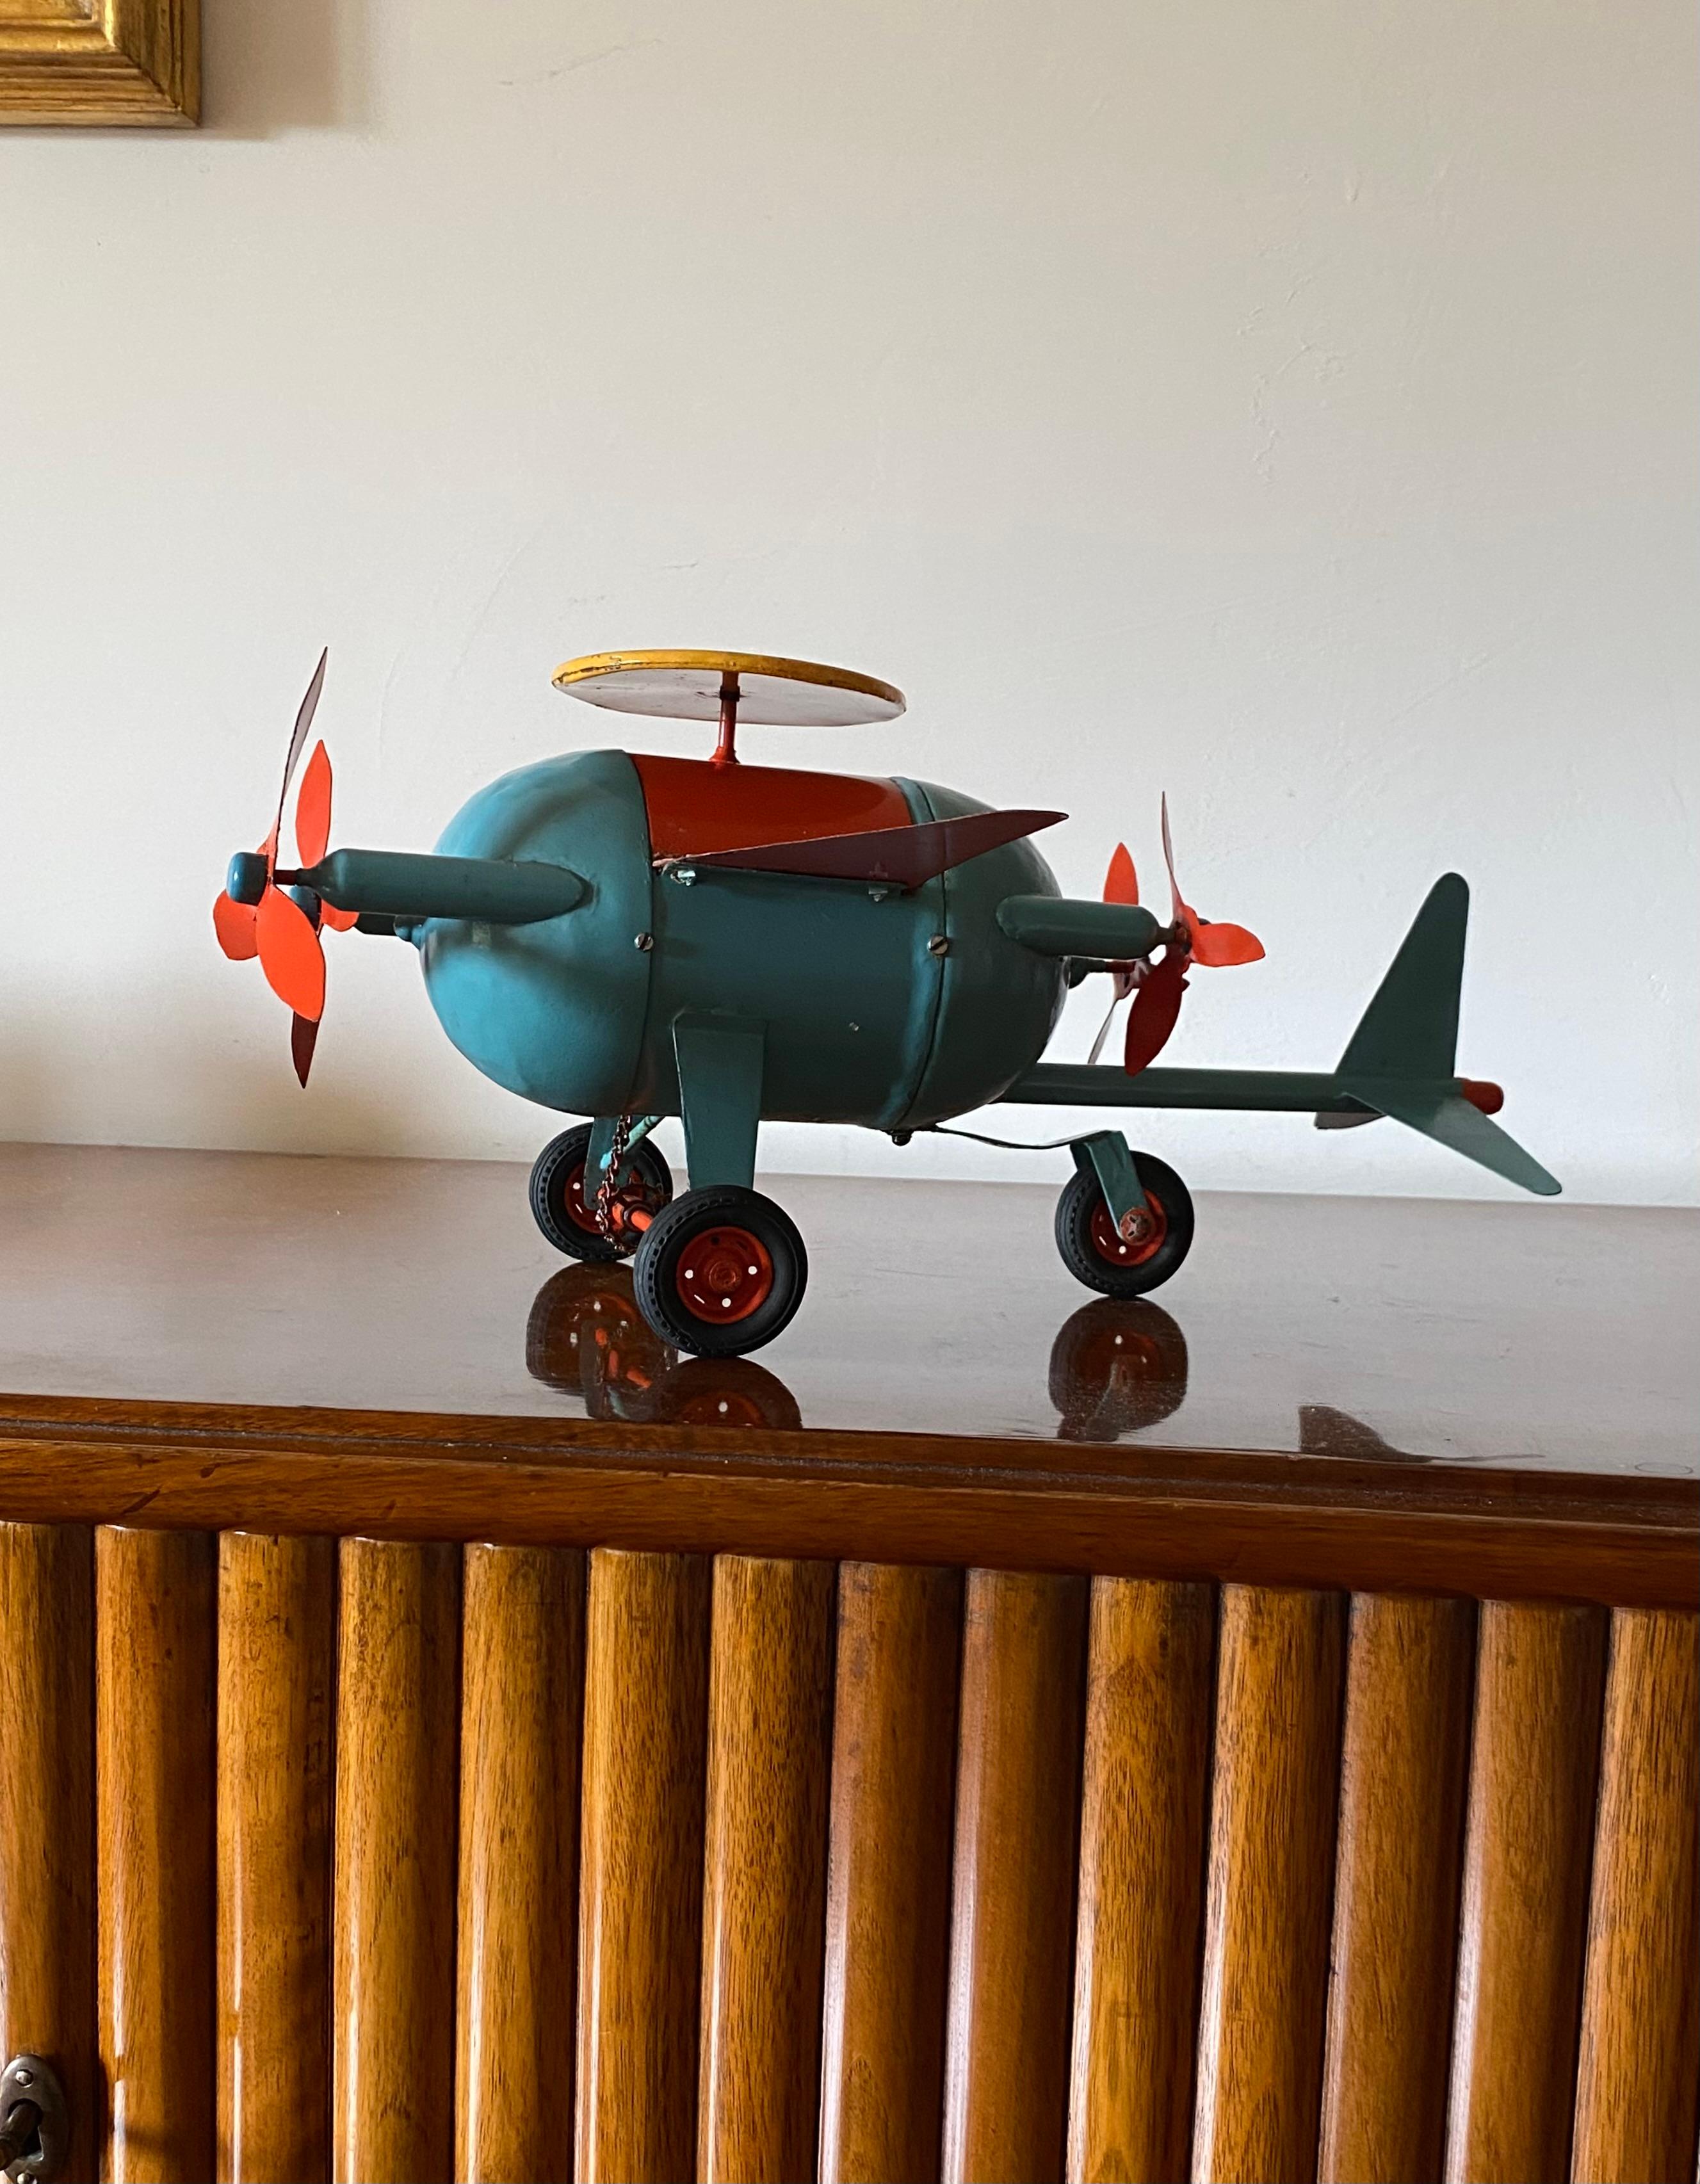 Red and blue airplane toy

France early 20th century

H: 18 cm - 44 x 37 cm

Conditions: excellent. No defects.